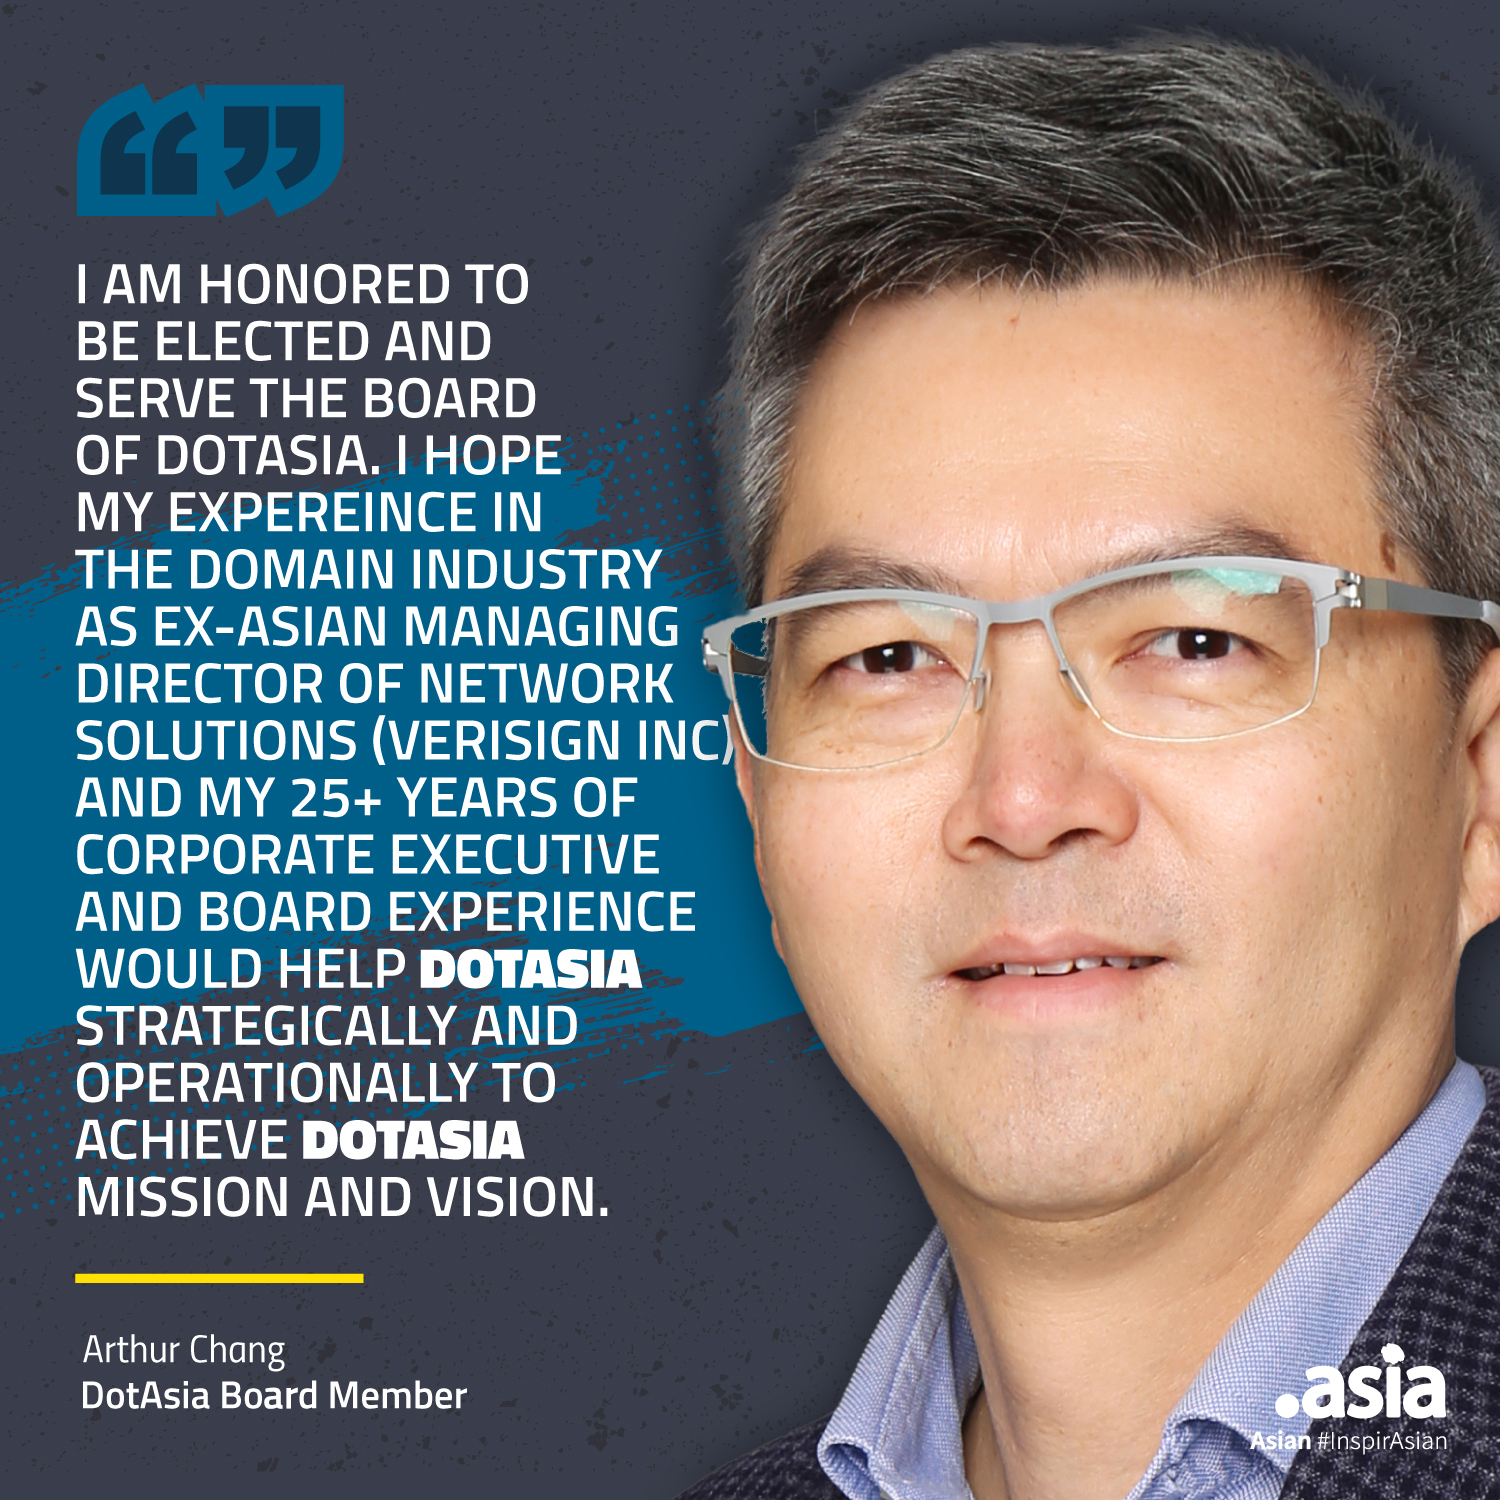 Image: Arthur Chang, newly elected to DotAsia Board of Directors